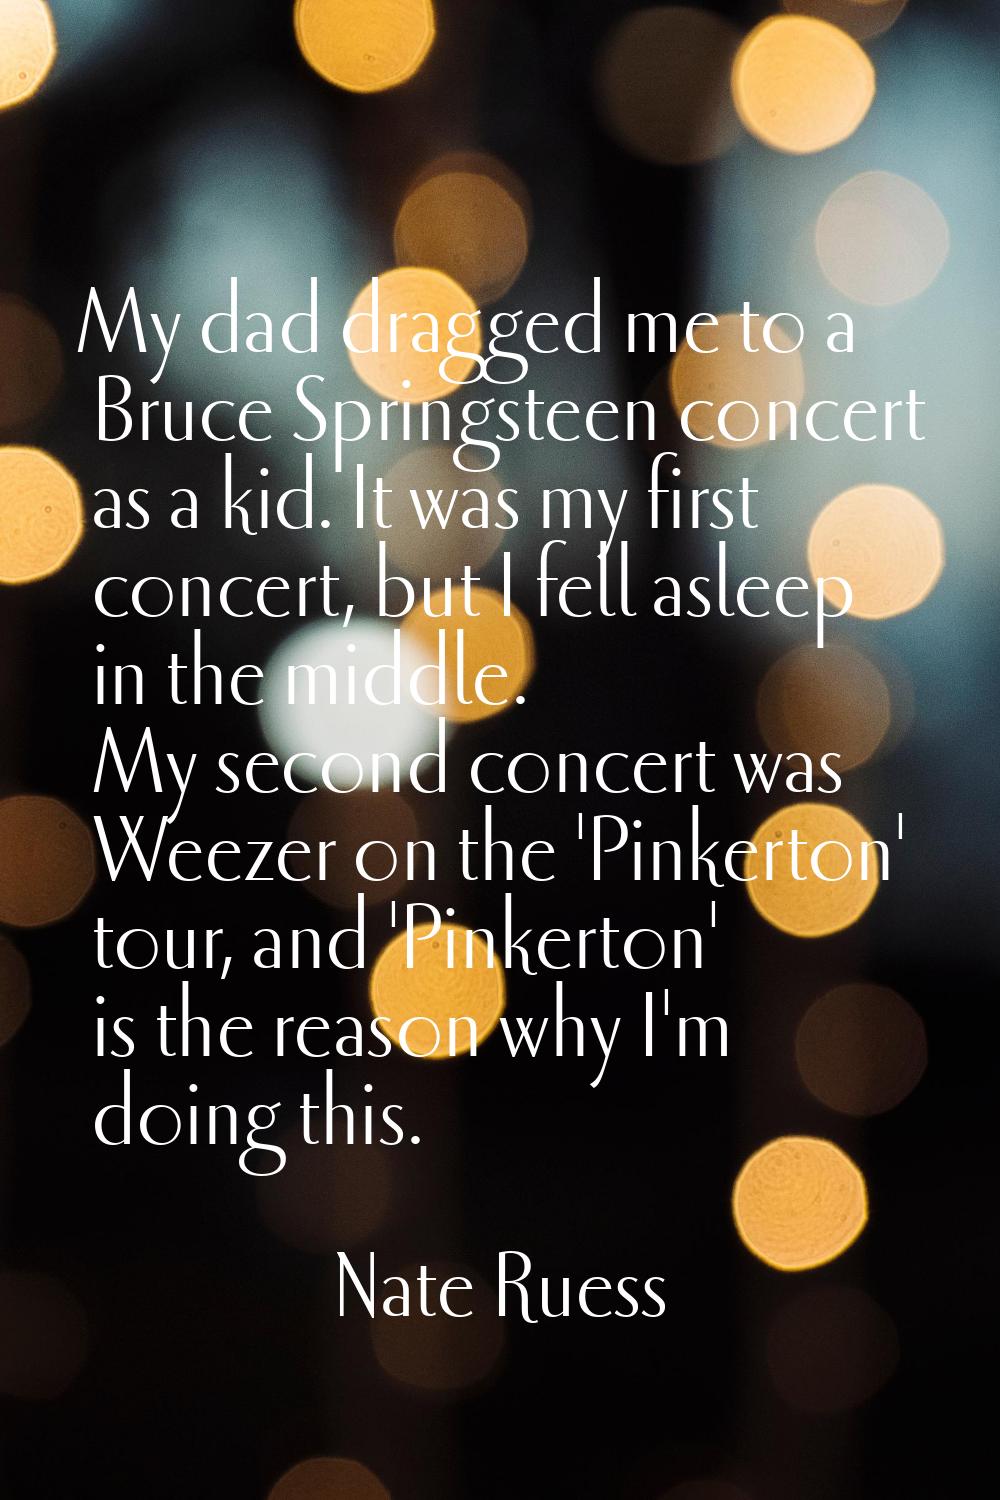 My dad dragged me to a Bruce Springsteen concert as a kid. It was my first concert, but I fell asle